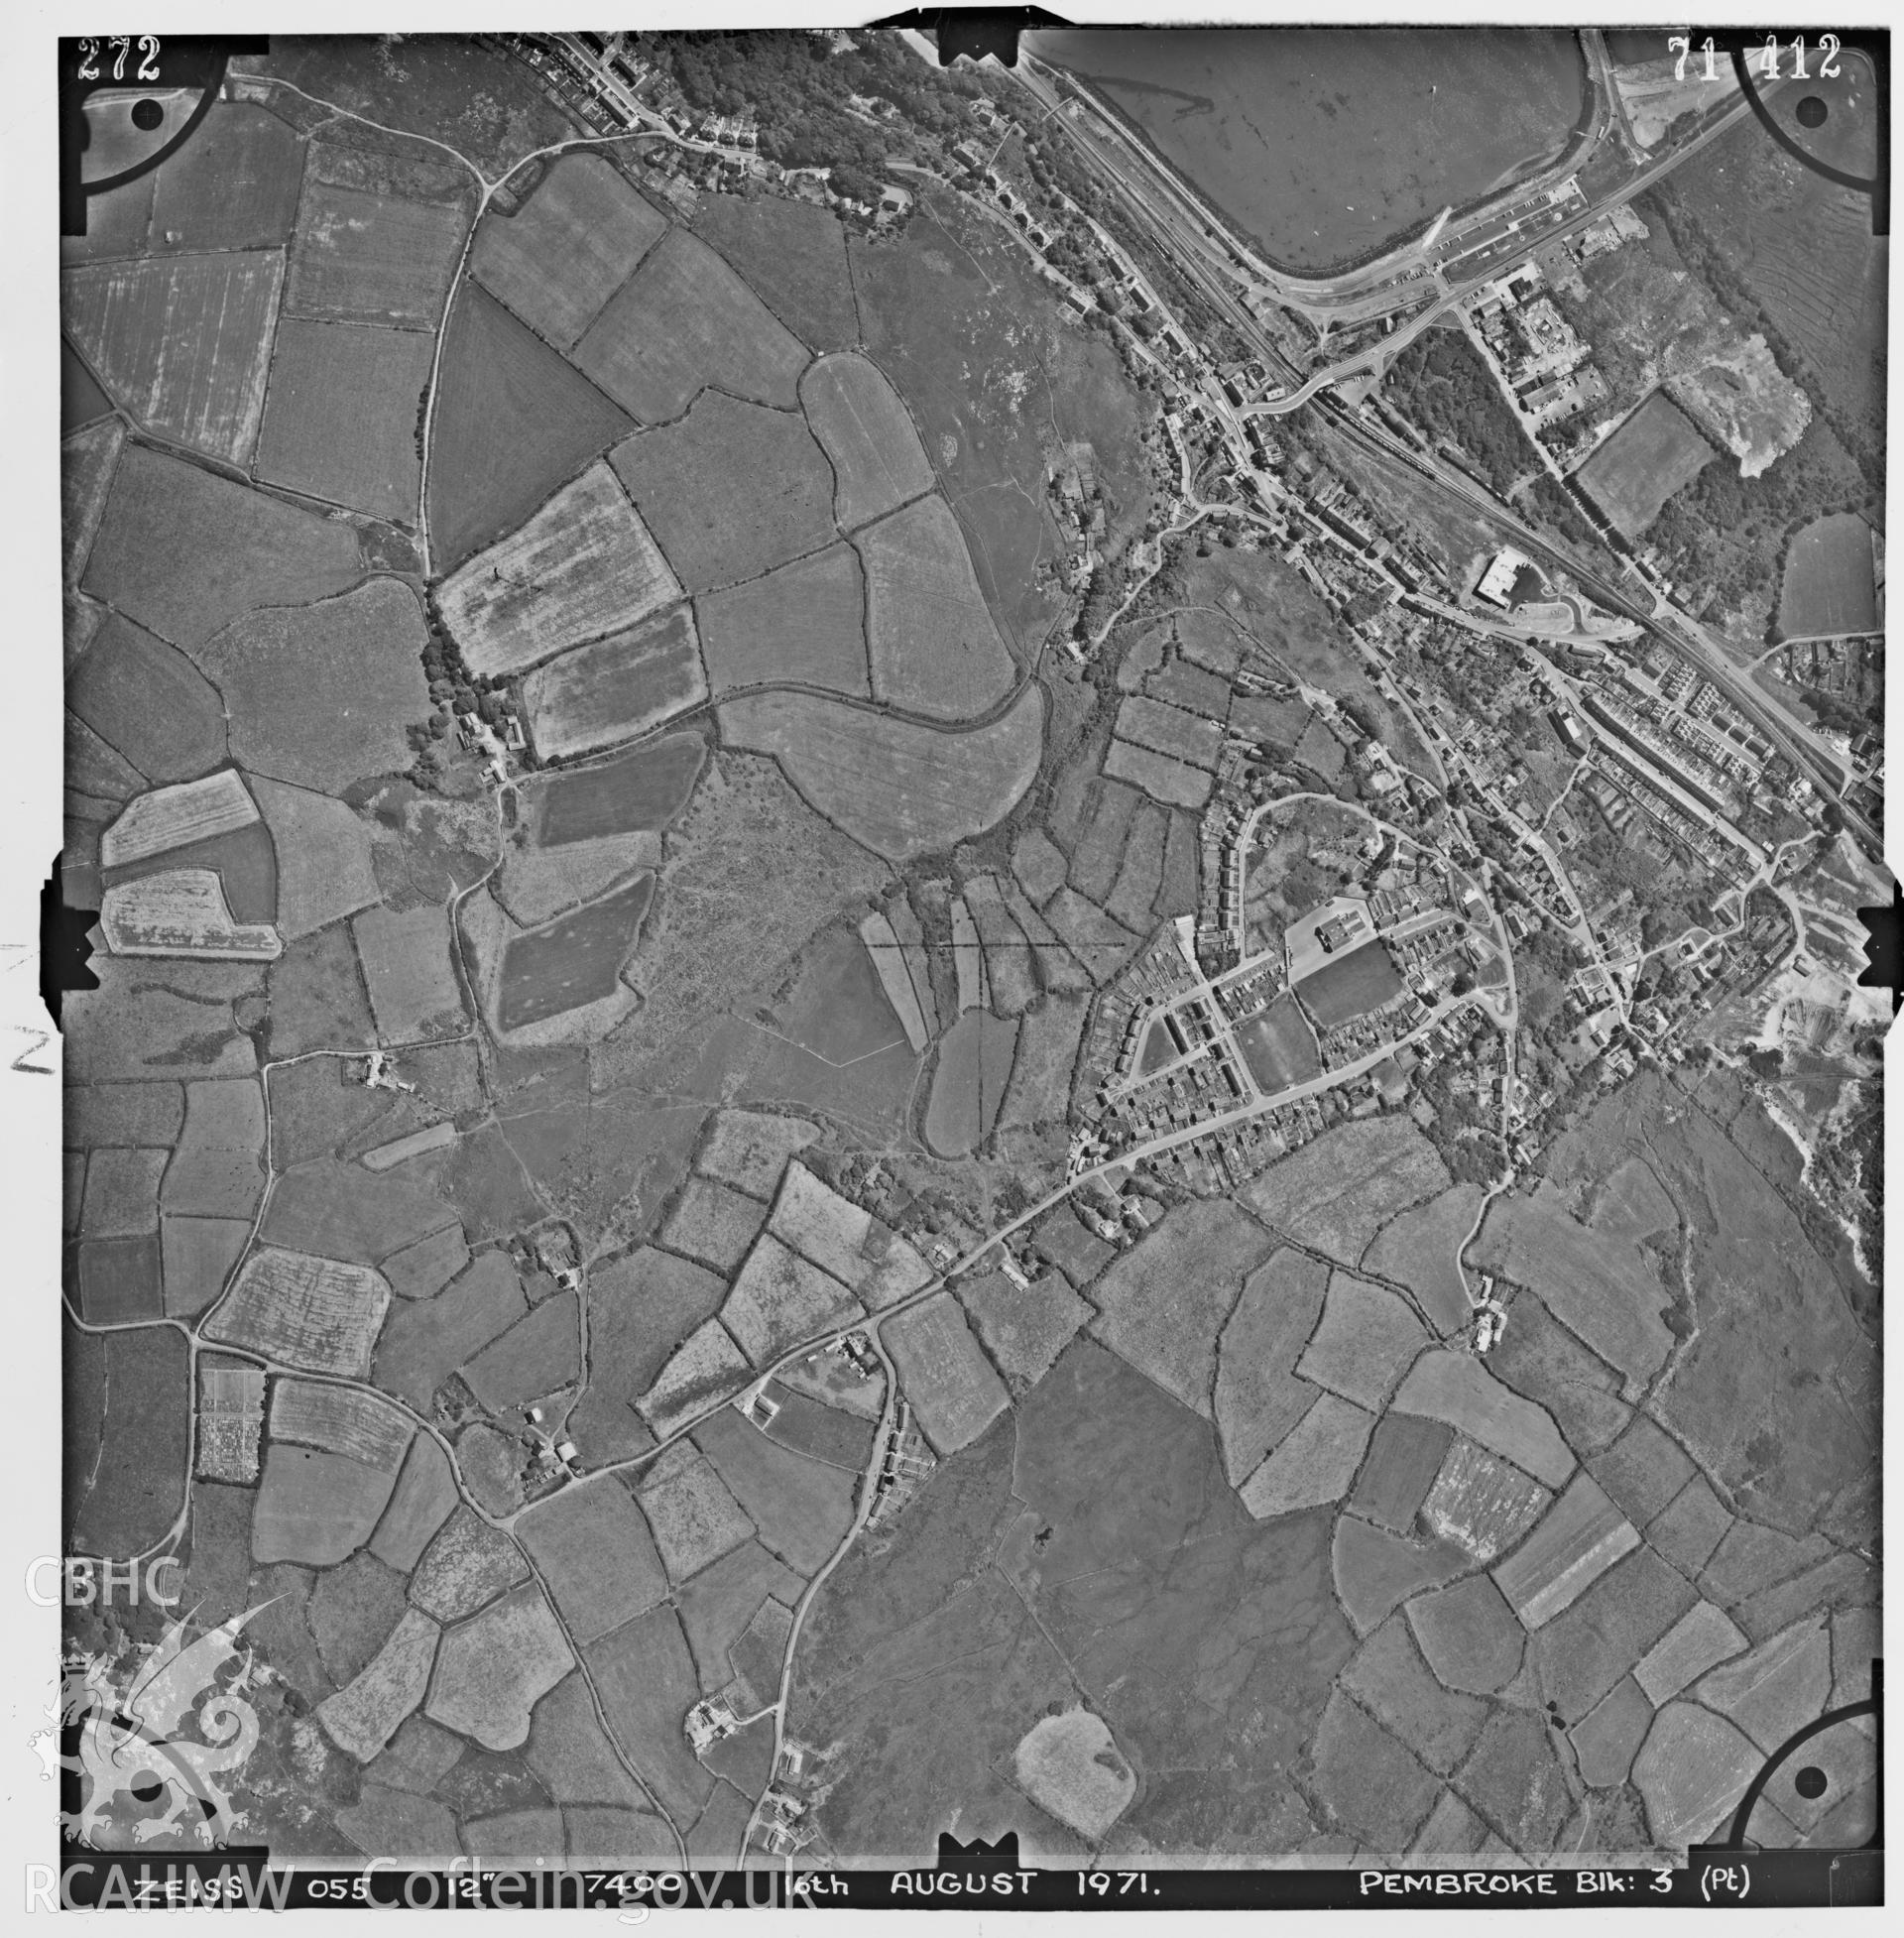 Aerial photograph showing the area around Goodwick, taken by Ordnance Survey, 1971.